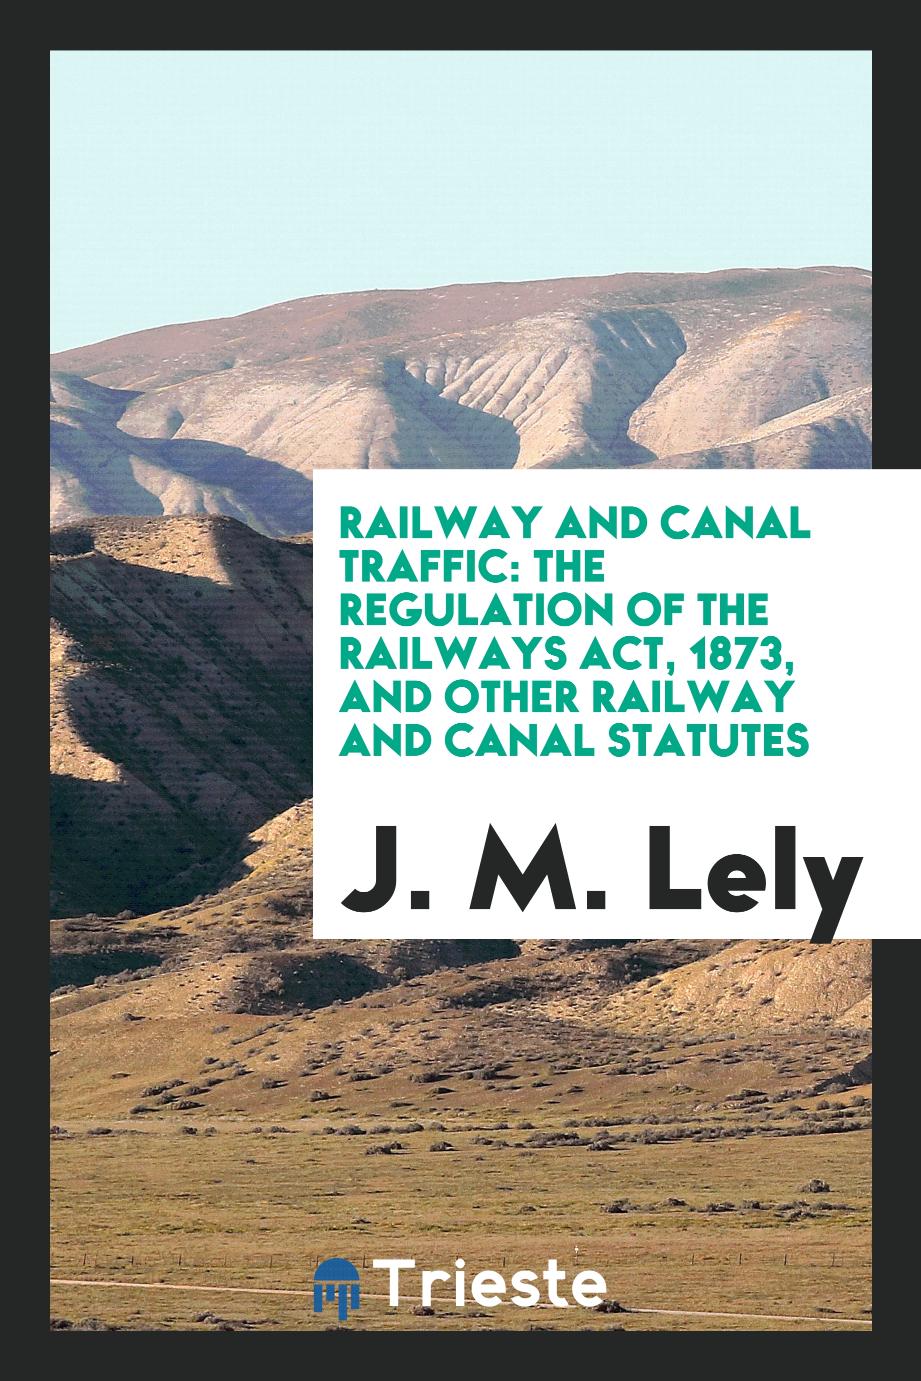 Railway and Canal Traffic: The Regulation of the Railways Act, 1873, and Other Railway and Canal Statutes